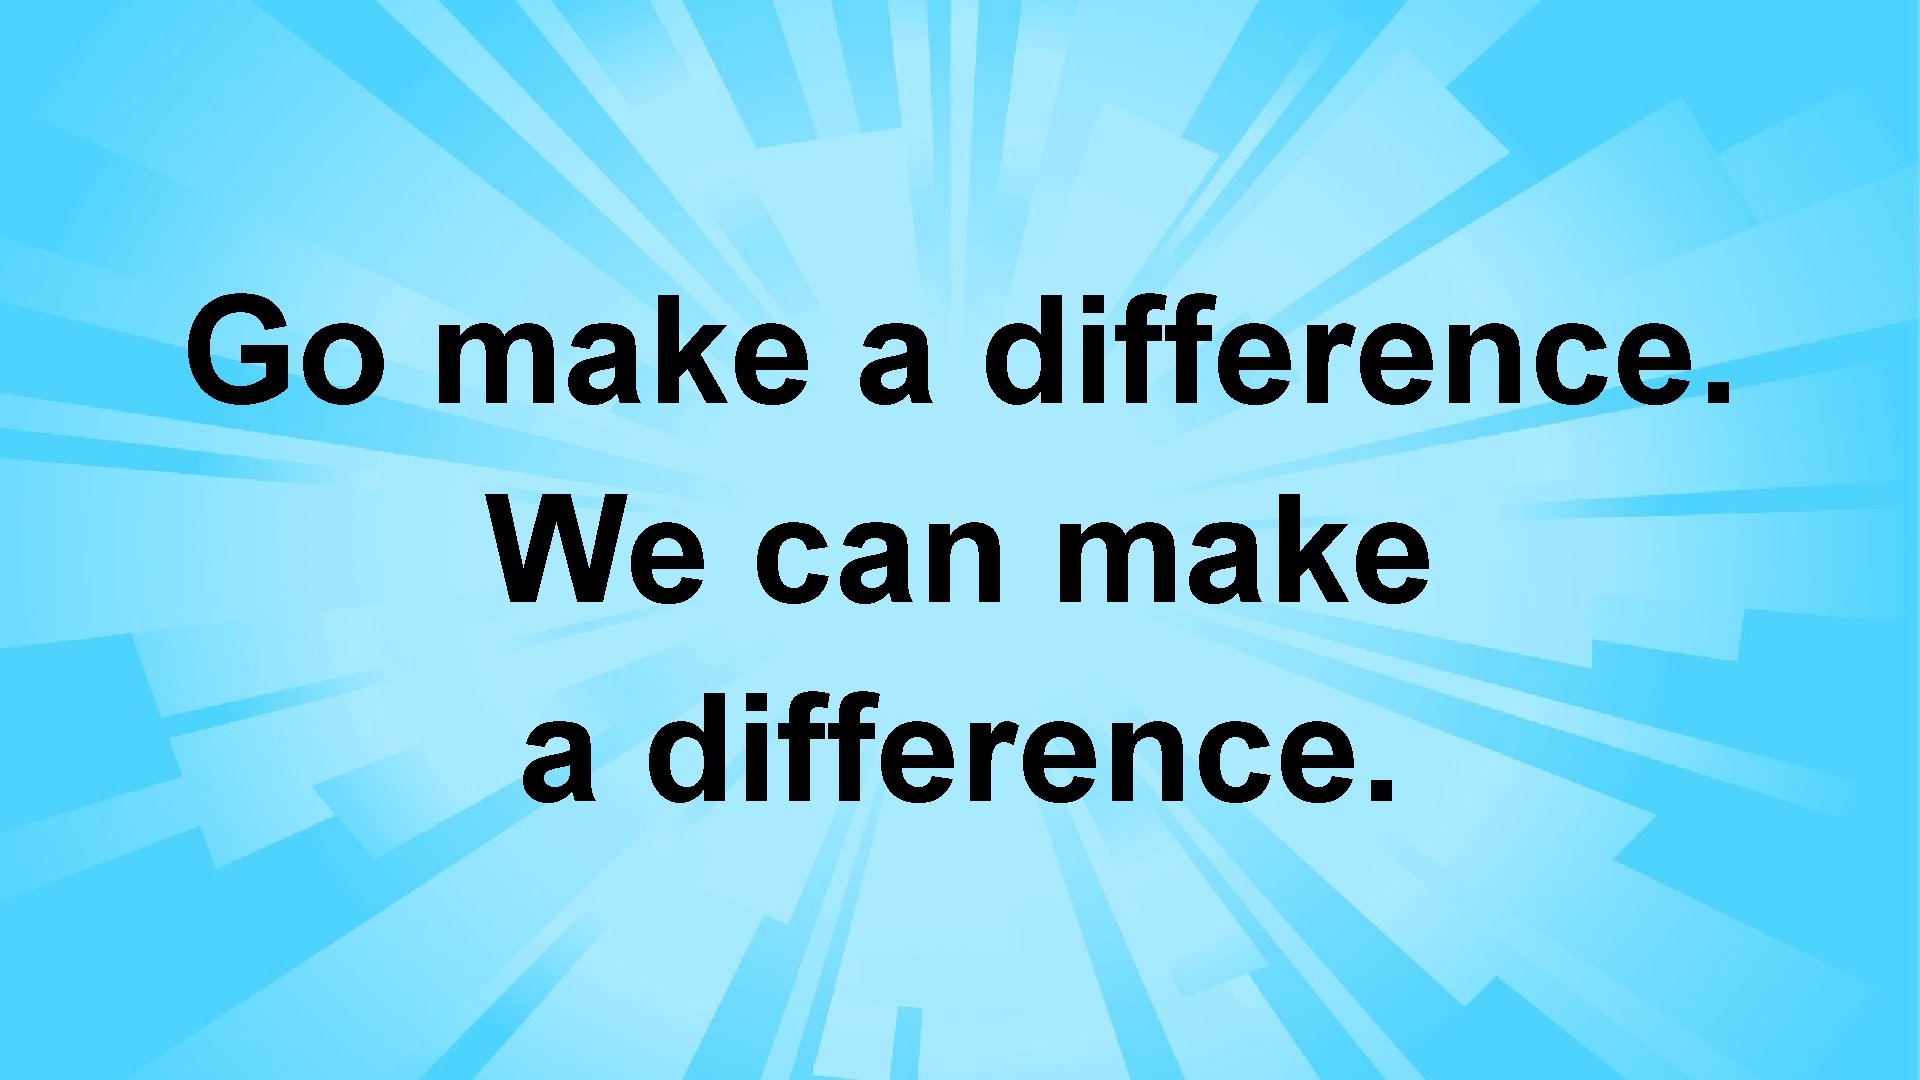 Go make a difference. We can make a difference. 